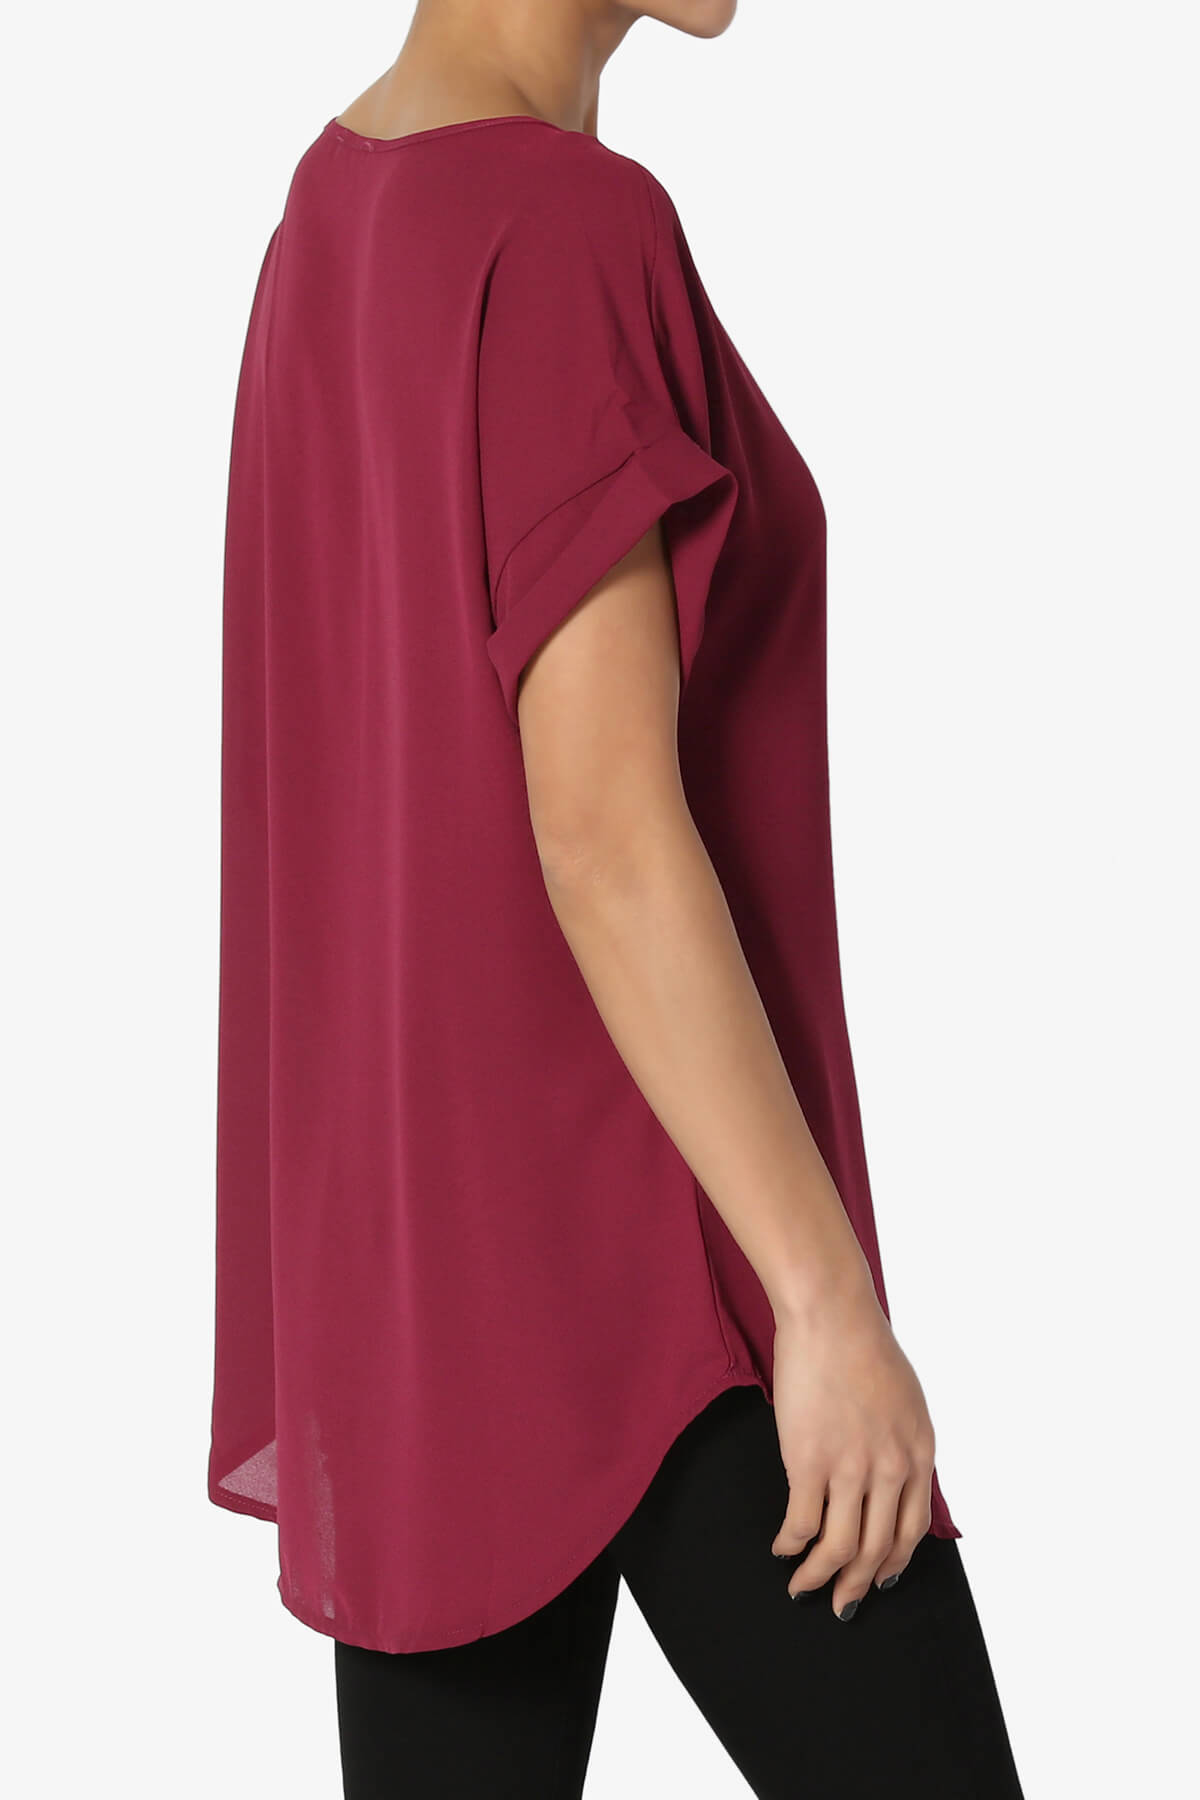 Load image into Gallery viewer, Juliette Boat Neck Chiffon Top WINE_4
